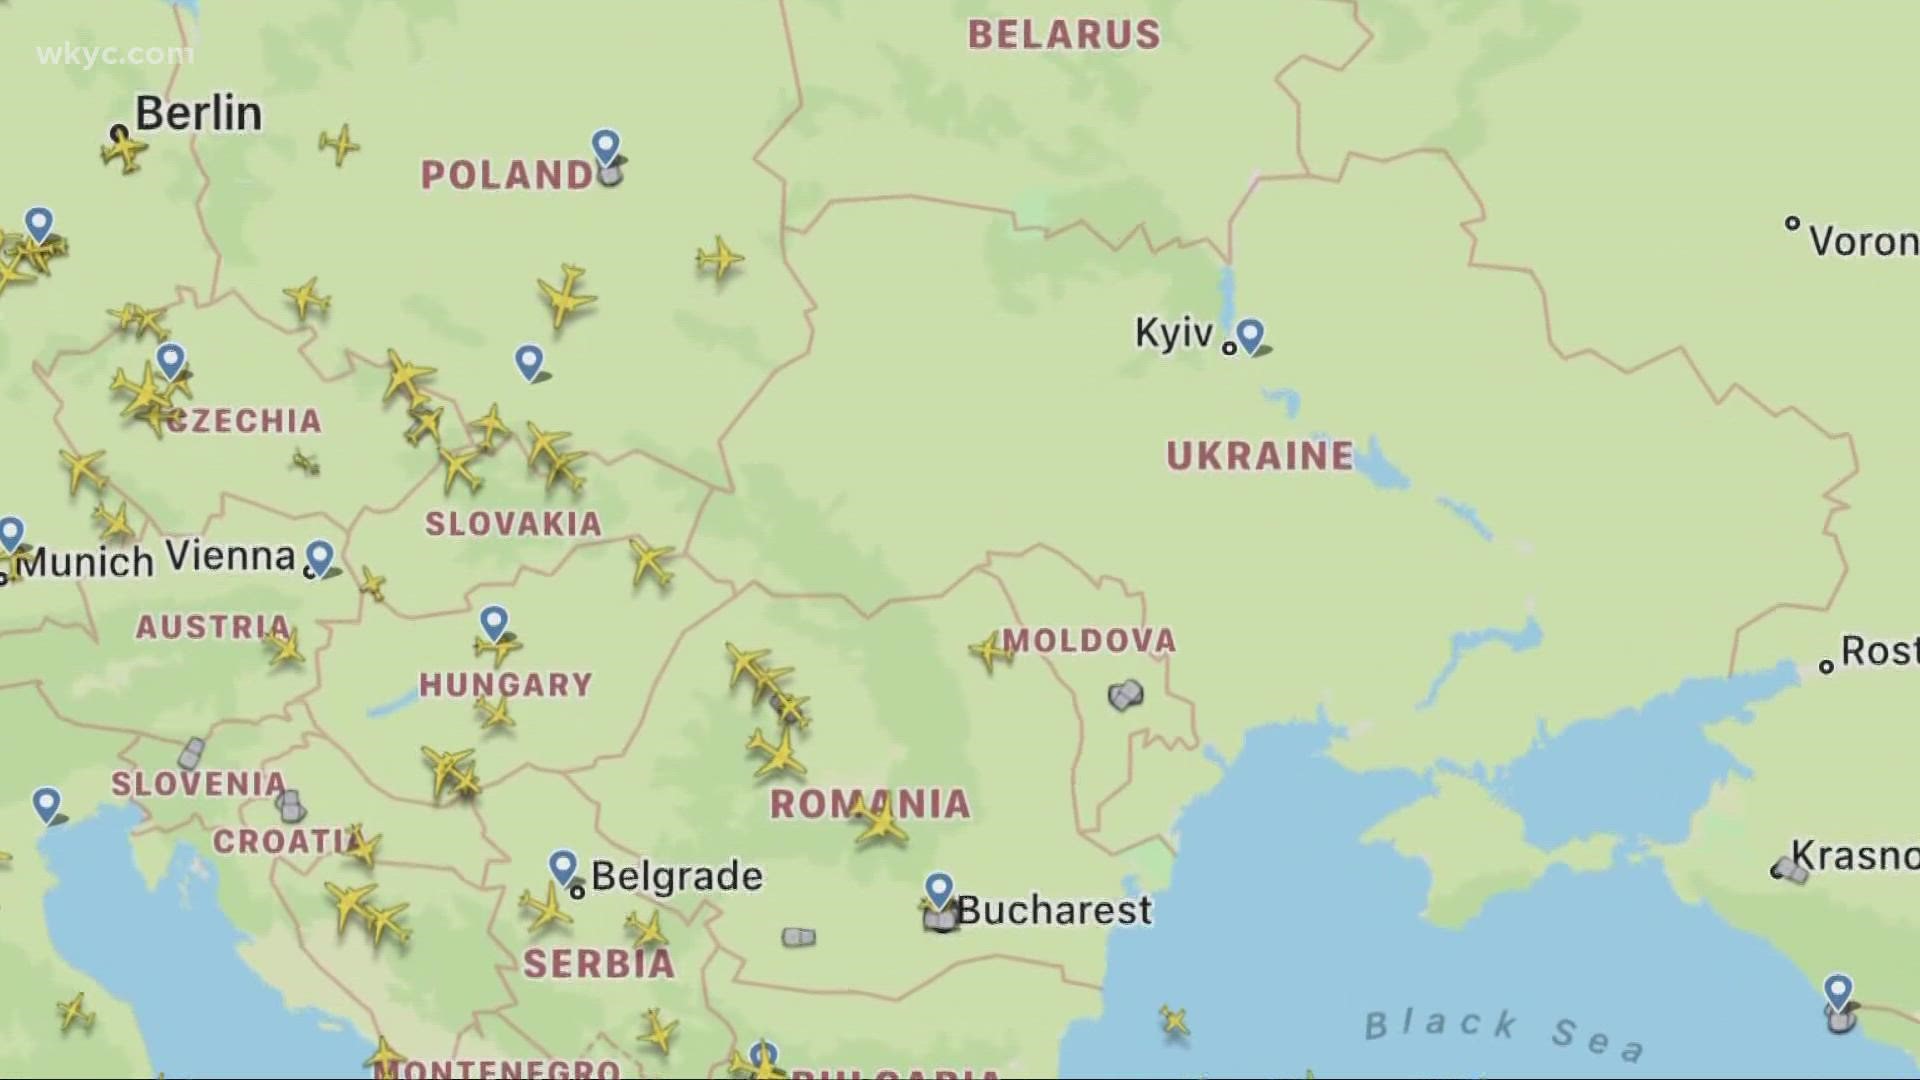 Currently, the skies above Ukraine are currently in a 'restrictive' state, but the country is asking NATO to declare a no-fly zone over the area.